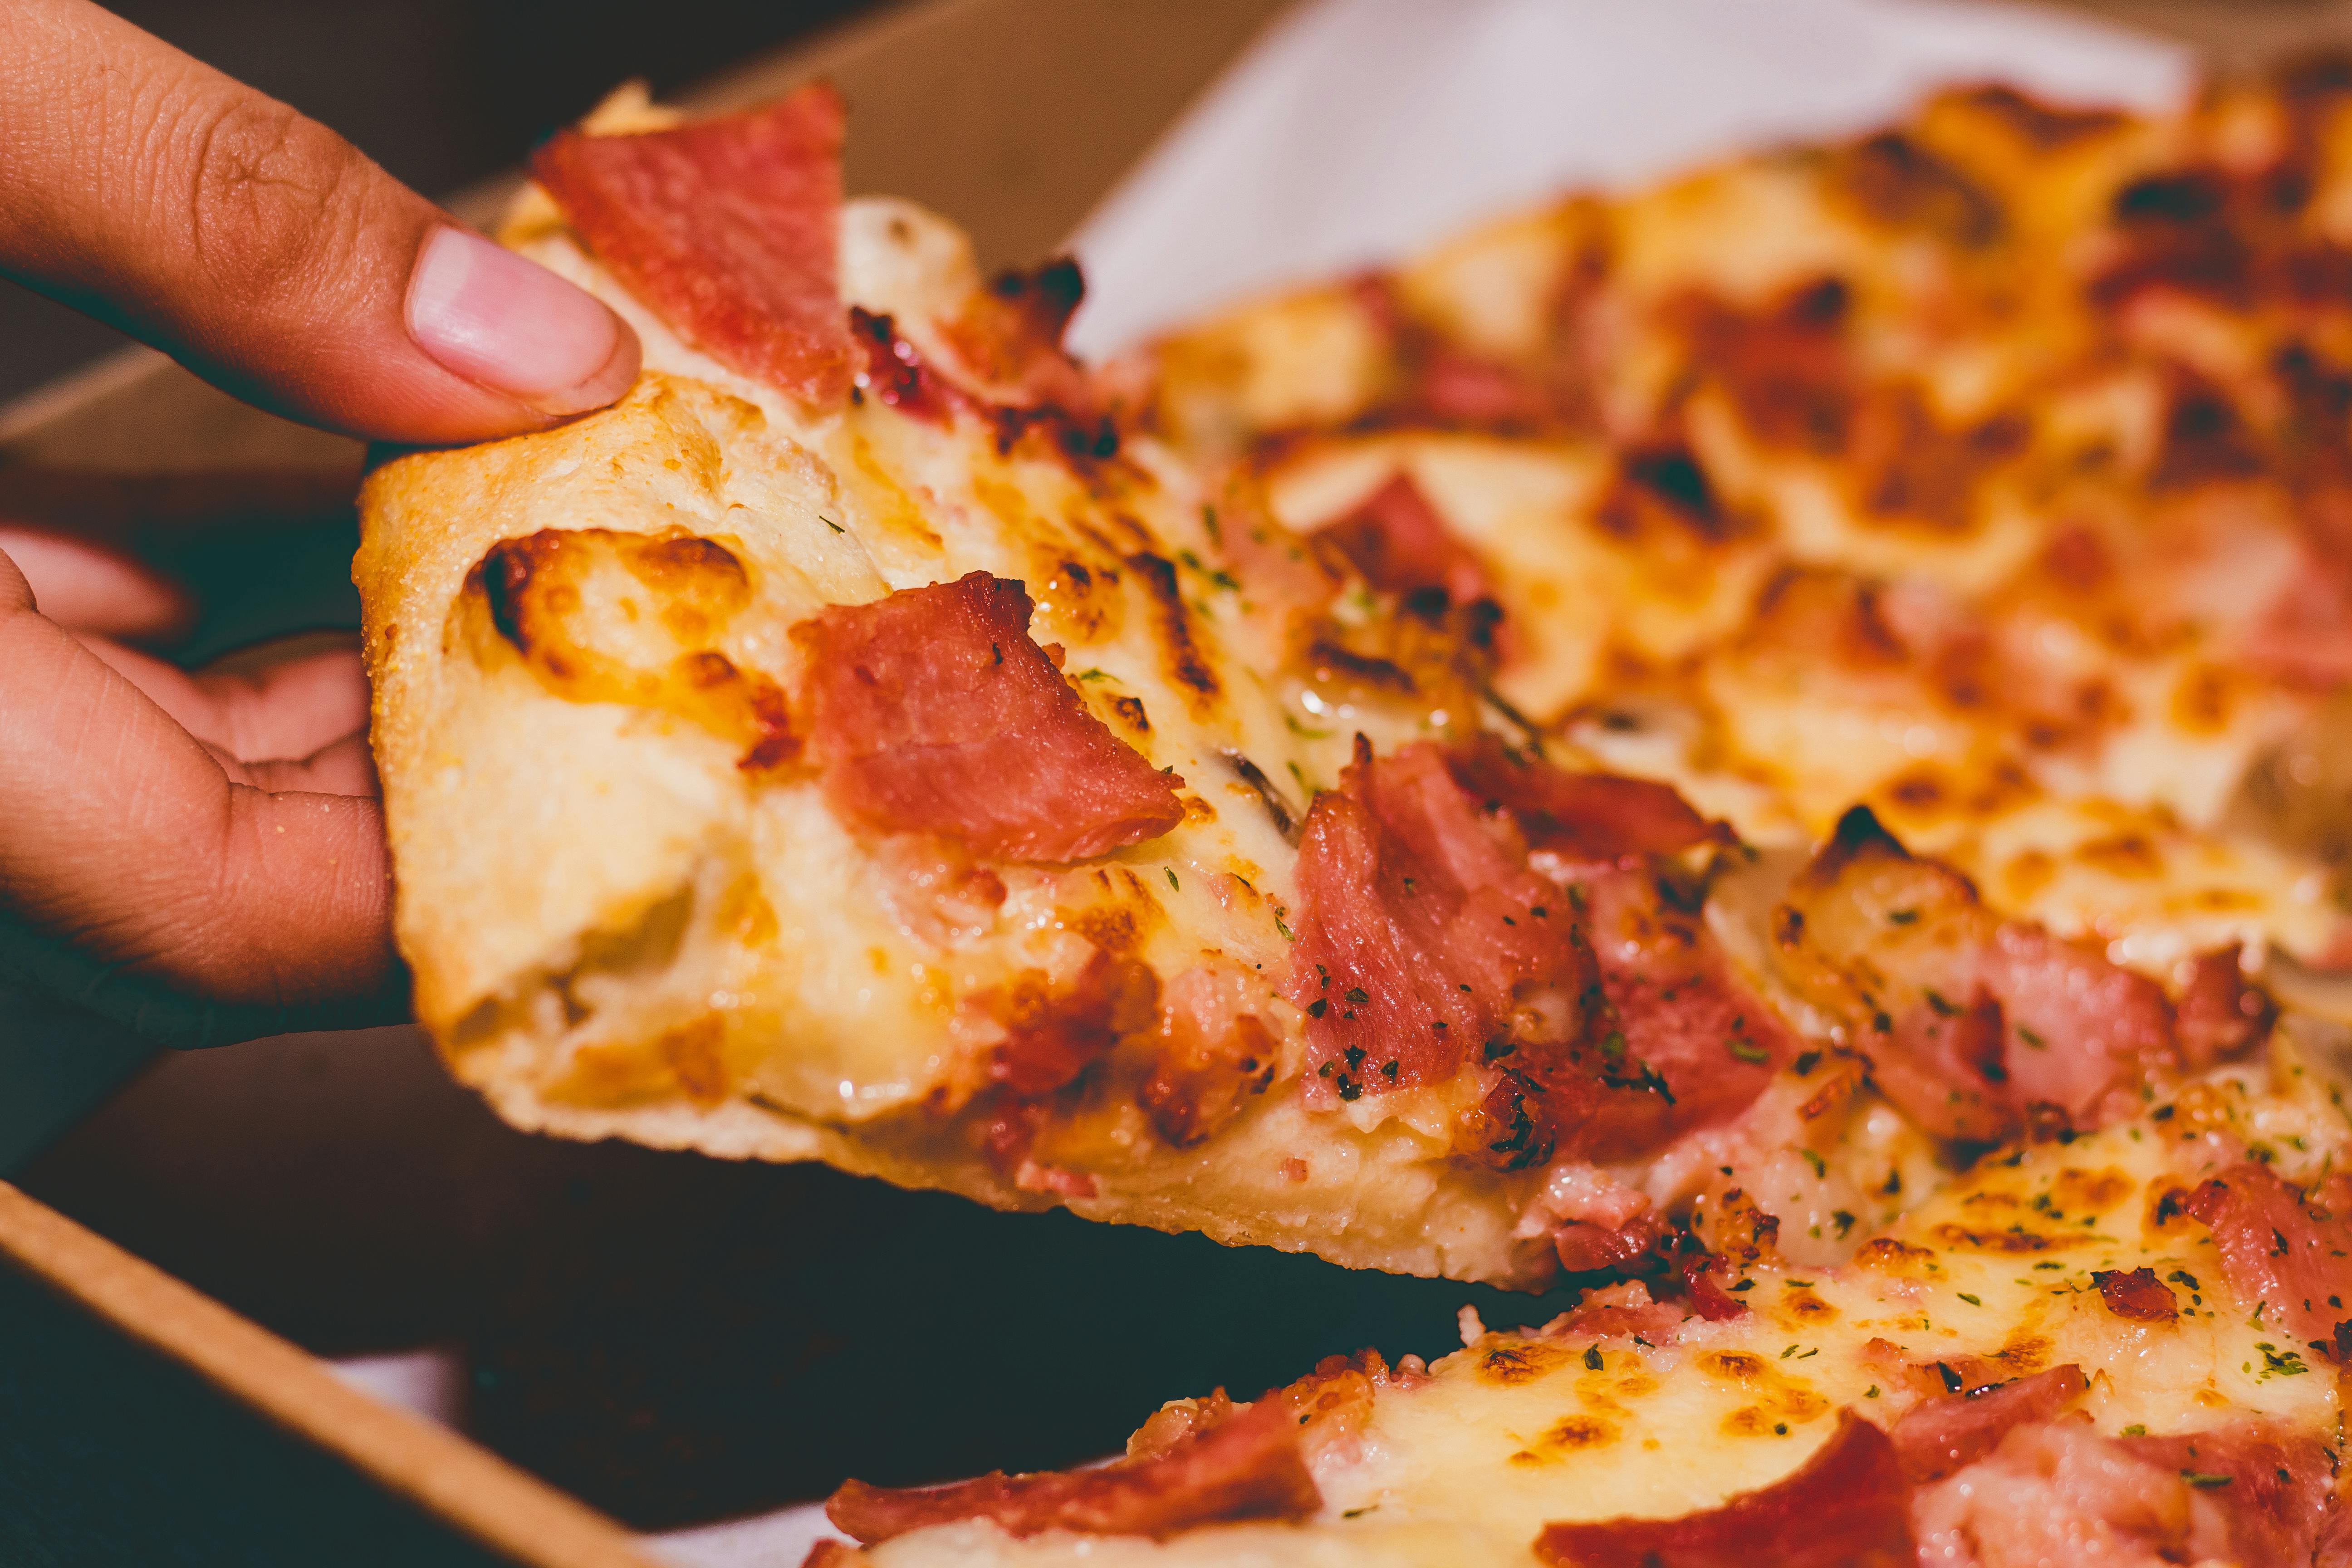 A sliced pizzza. For illustration purposes only | Source: Pexels